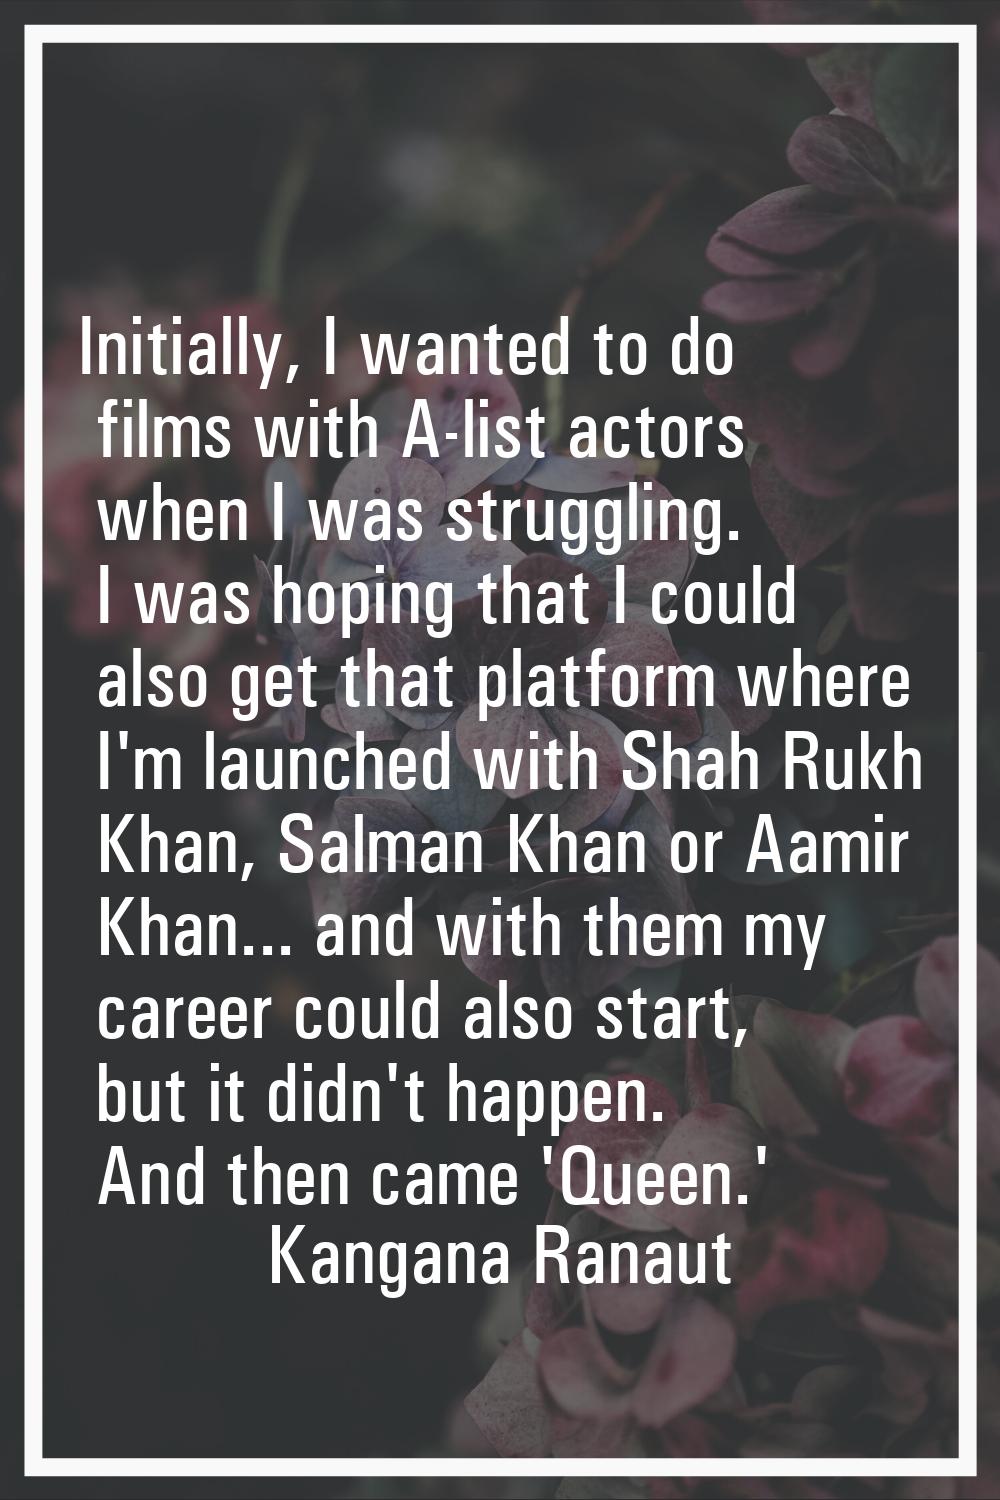 Initially, I wanted to do films with A-list actors when I was struggling. I was hoping that I could